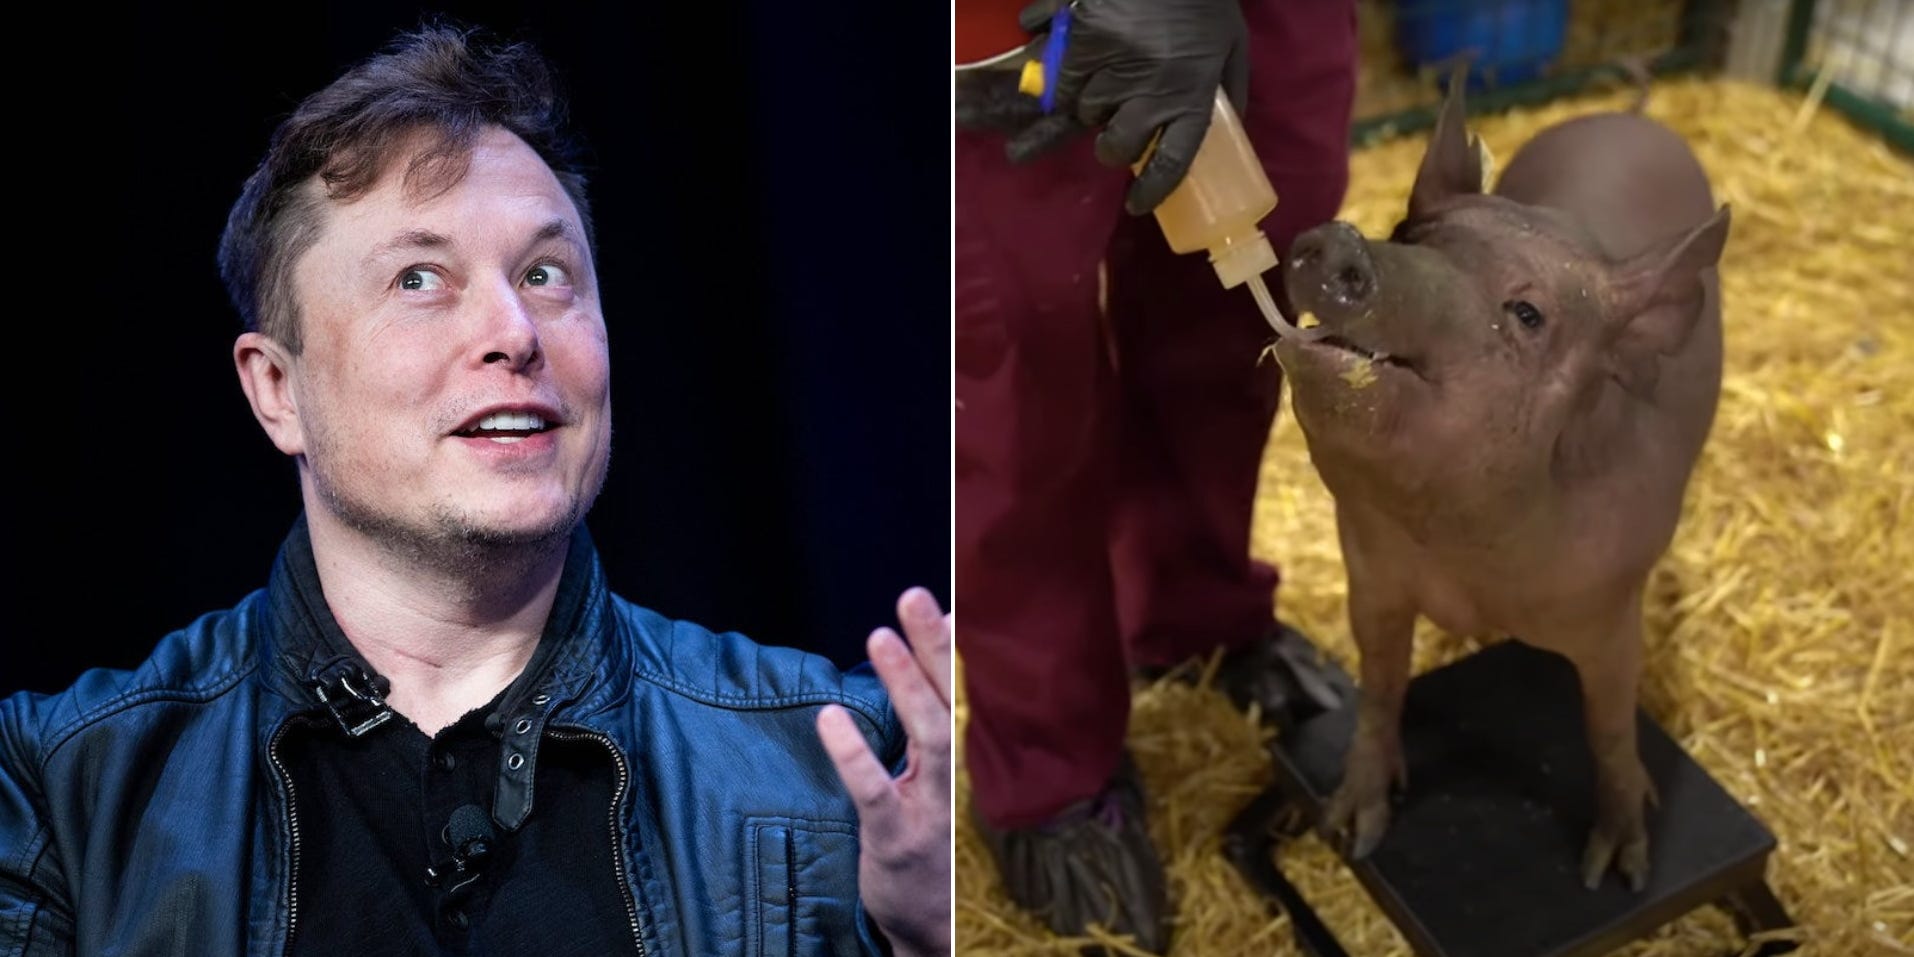 Even if Elon Musk’s Neuralink brain chip never gives us telepathy, it could do wonders for animal testing